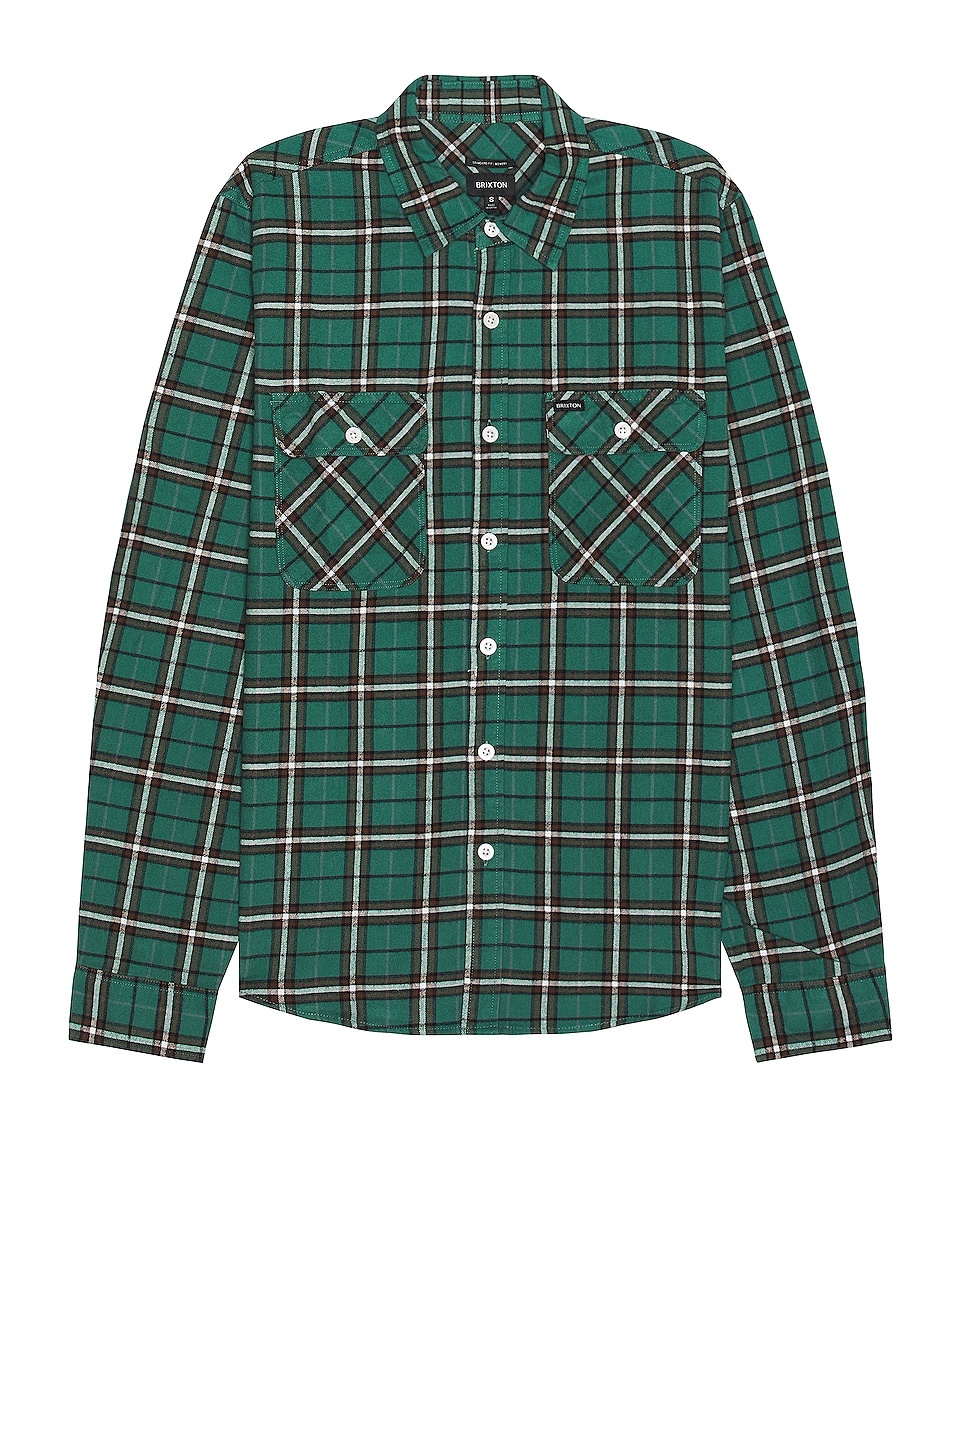 Brixton Bowery Summer Weight Flannel Shirt in OFF WHITE/DARK EARTH ...